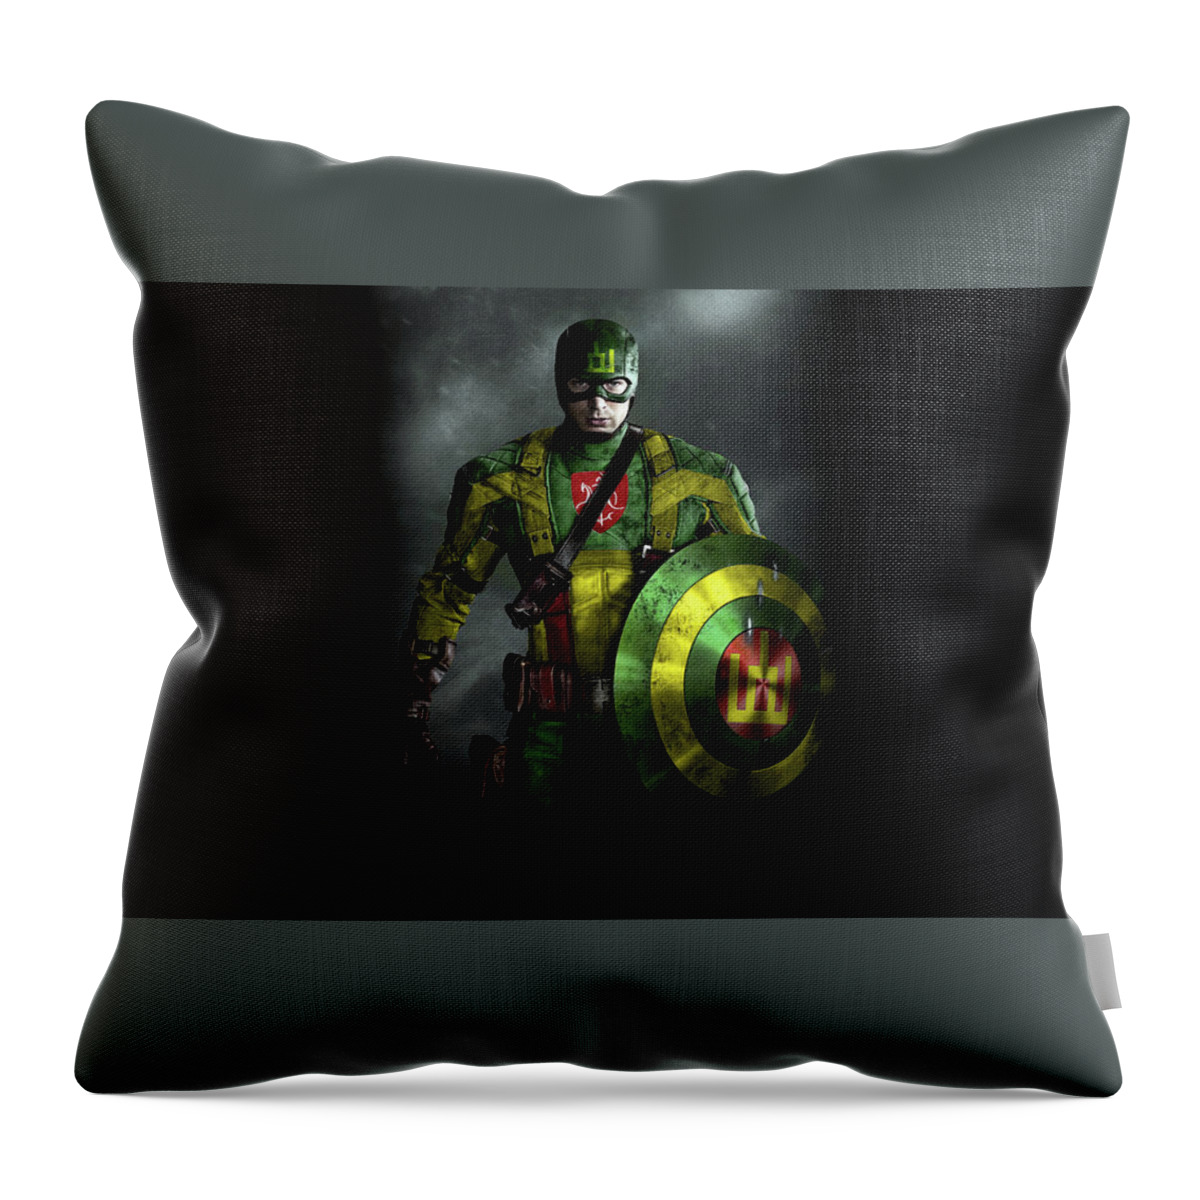 Sci Fi Throw Pillow featuring the digital art Sci Fi #13 by Super Lovely